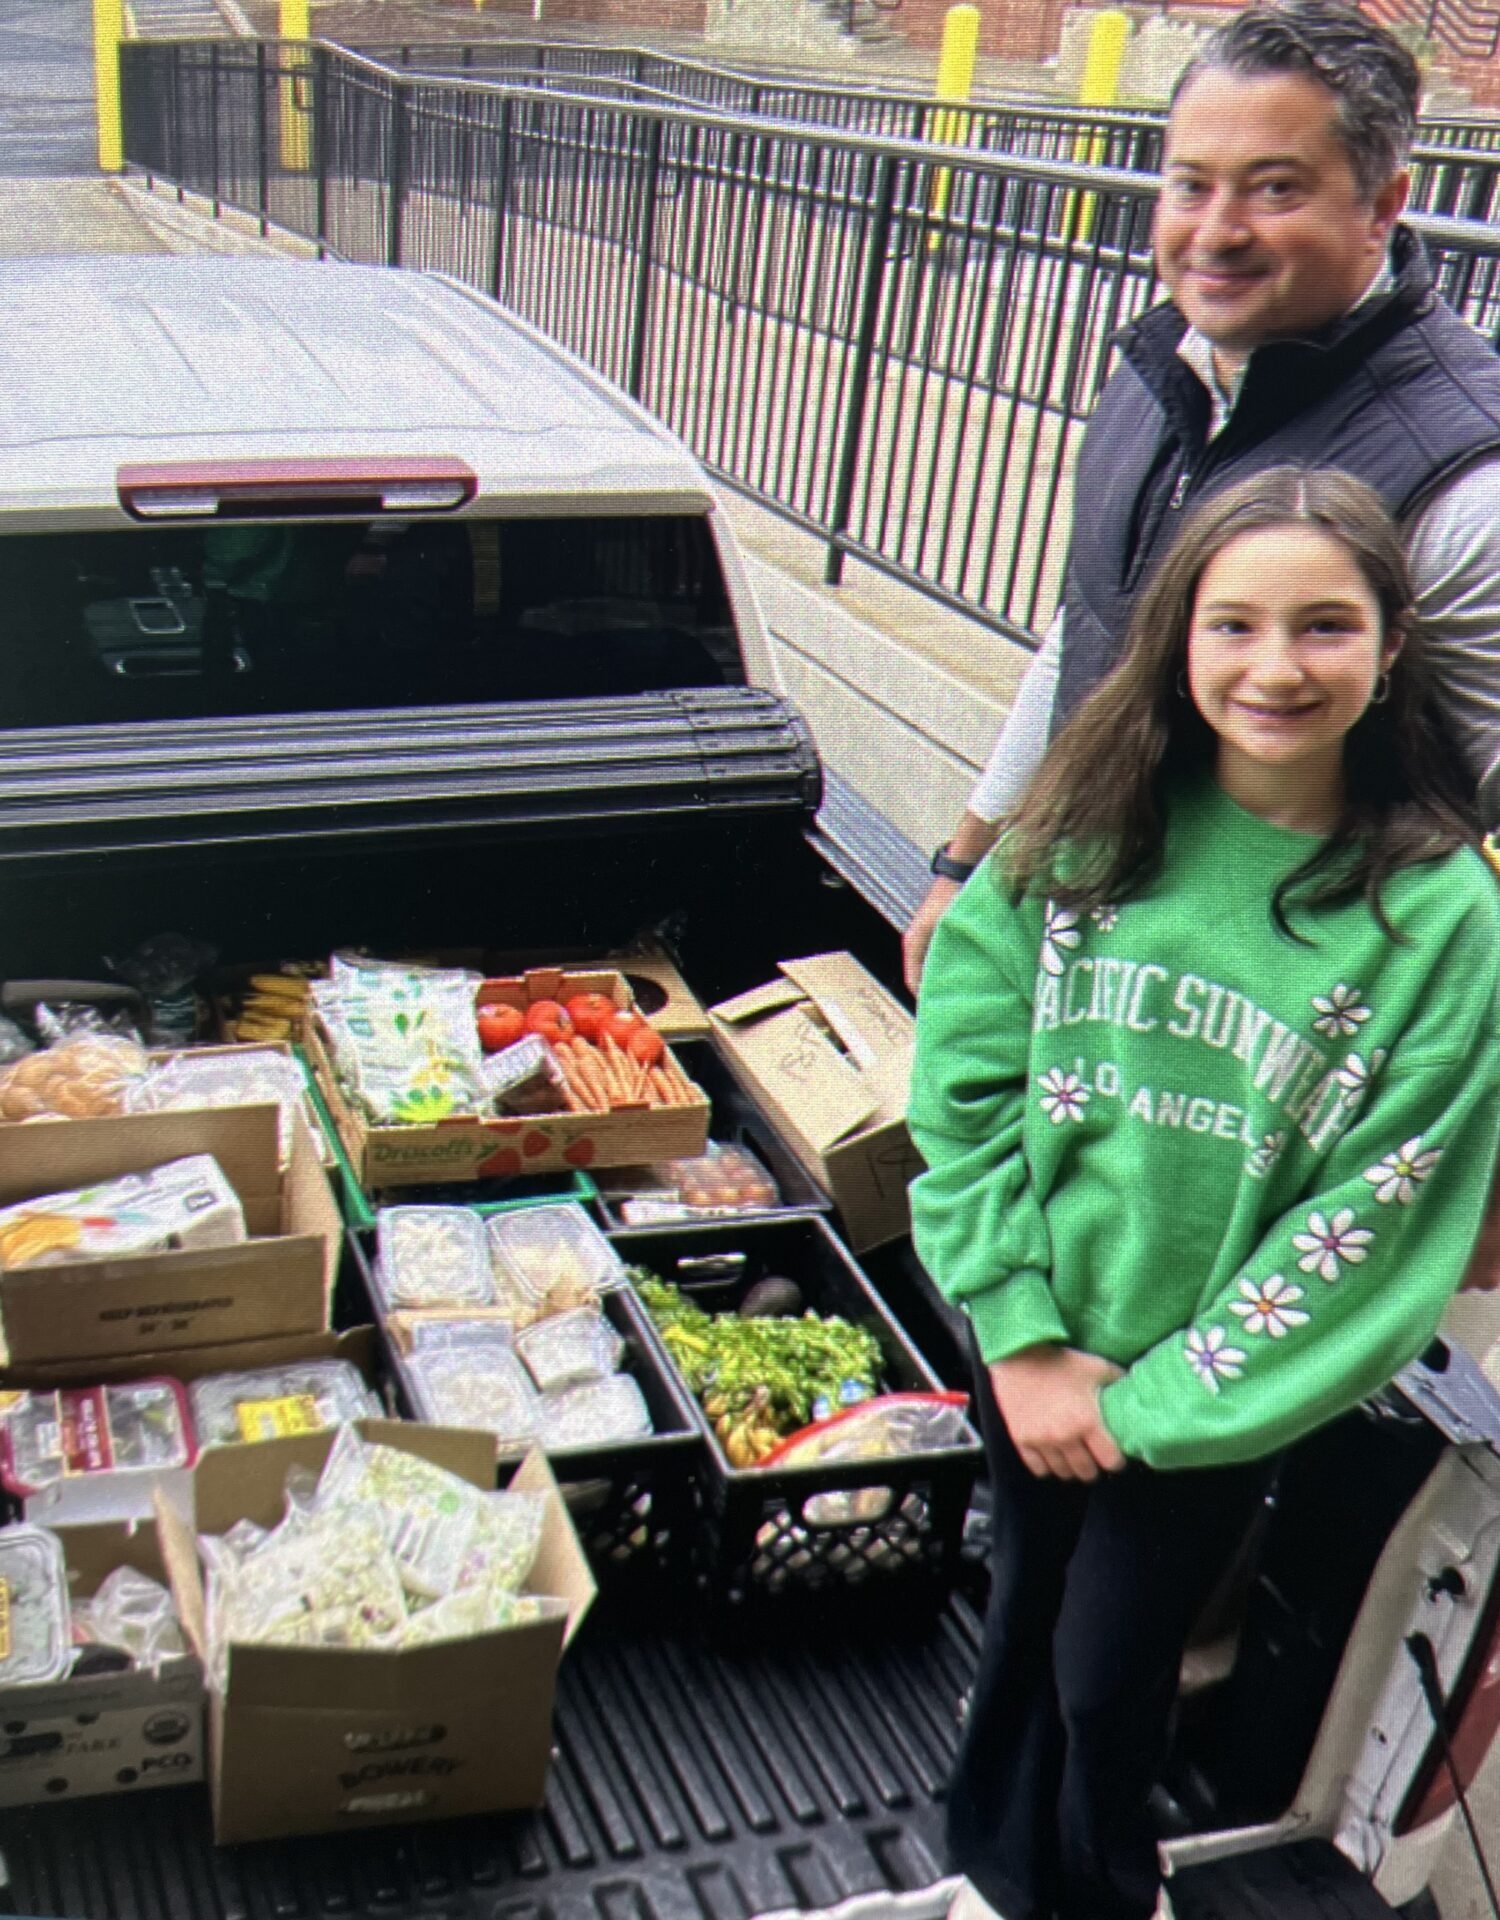 A father and daughter used the Table to Table I-Rescue app to rescue food and deliver it to our neighbors in need.